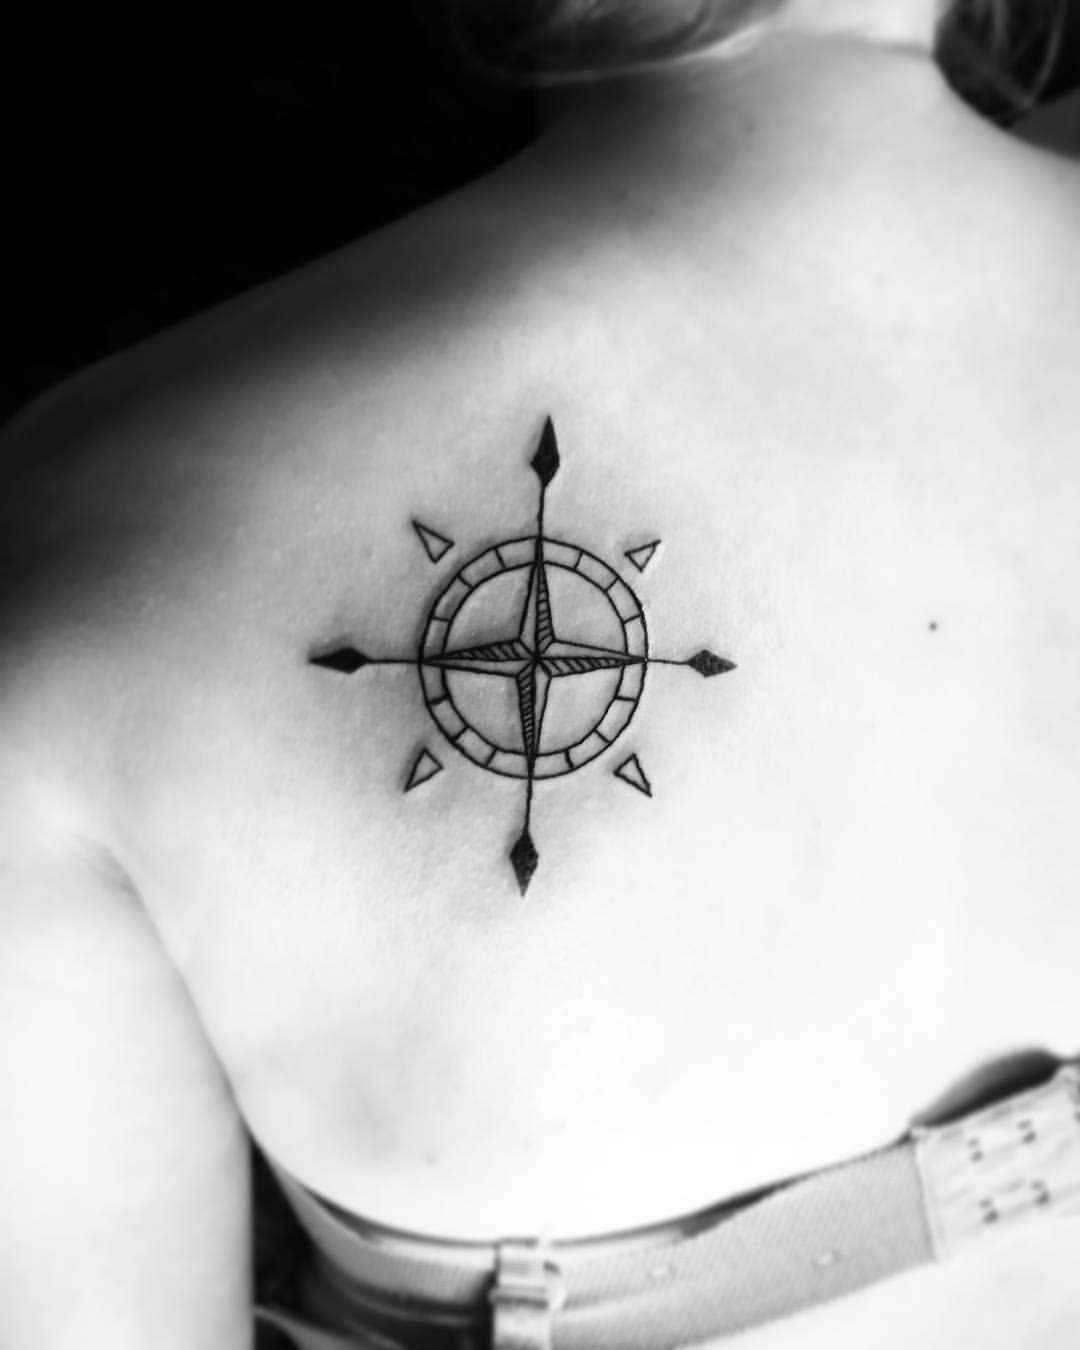 The Raven From The North — Compass tattoo #compass #compasstattoo #tattoo...